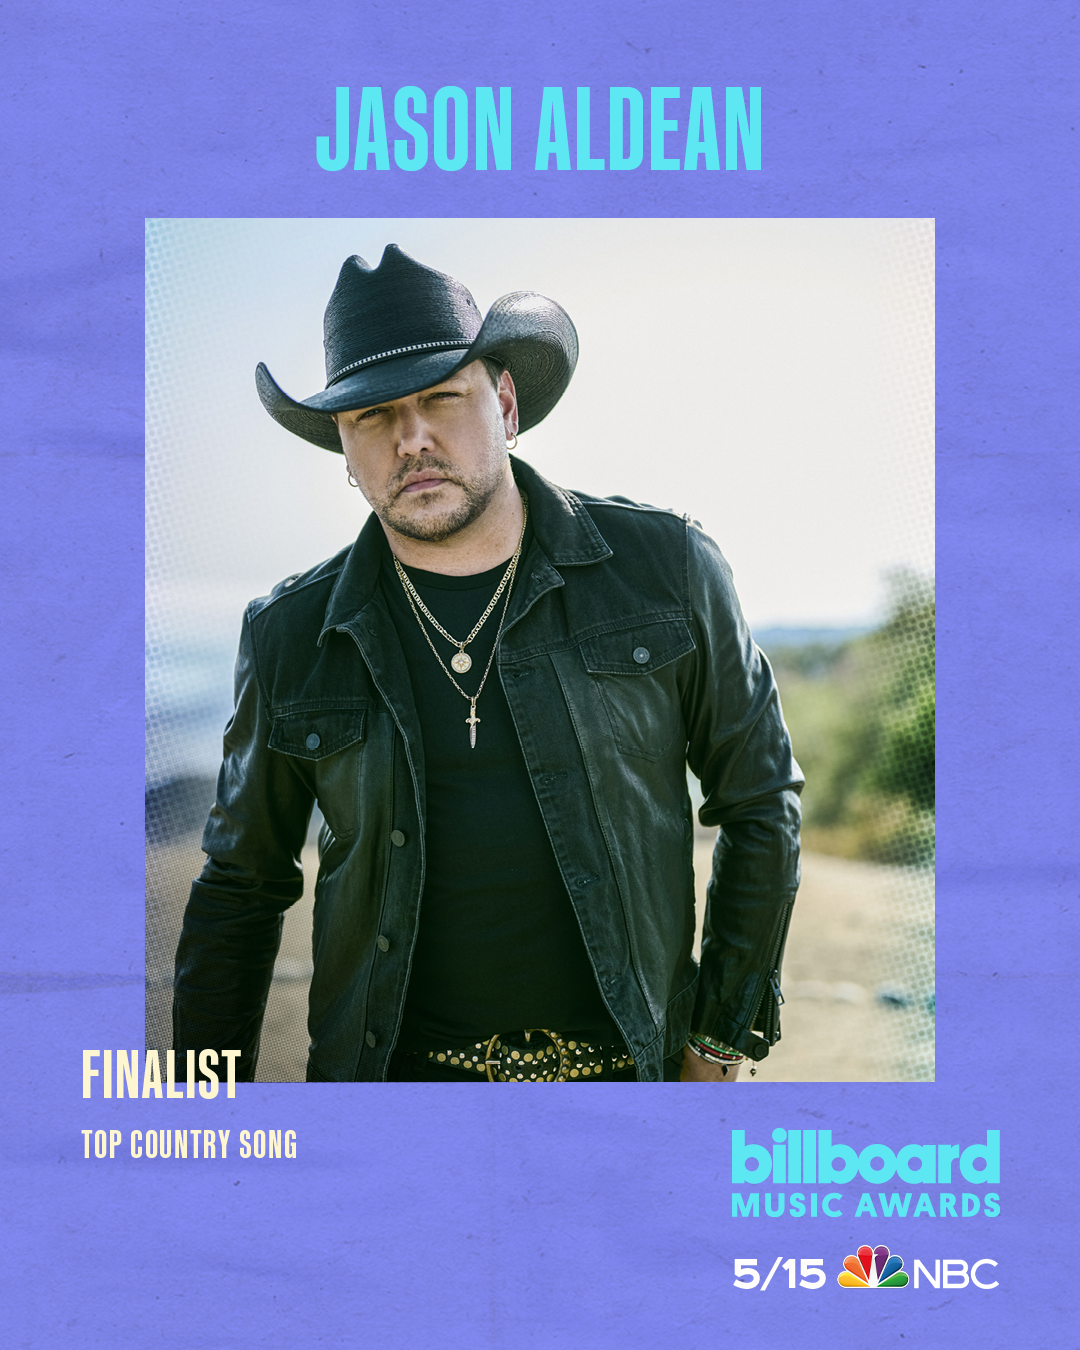 JASON ALDEAN FINALIST AT 2022 BILLBOARD MUSIC AWARDS FOR TOP COUNTRY